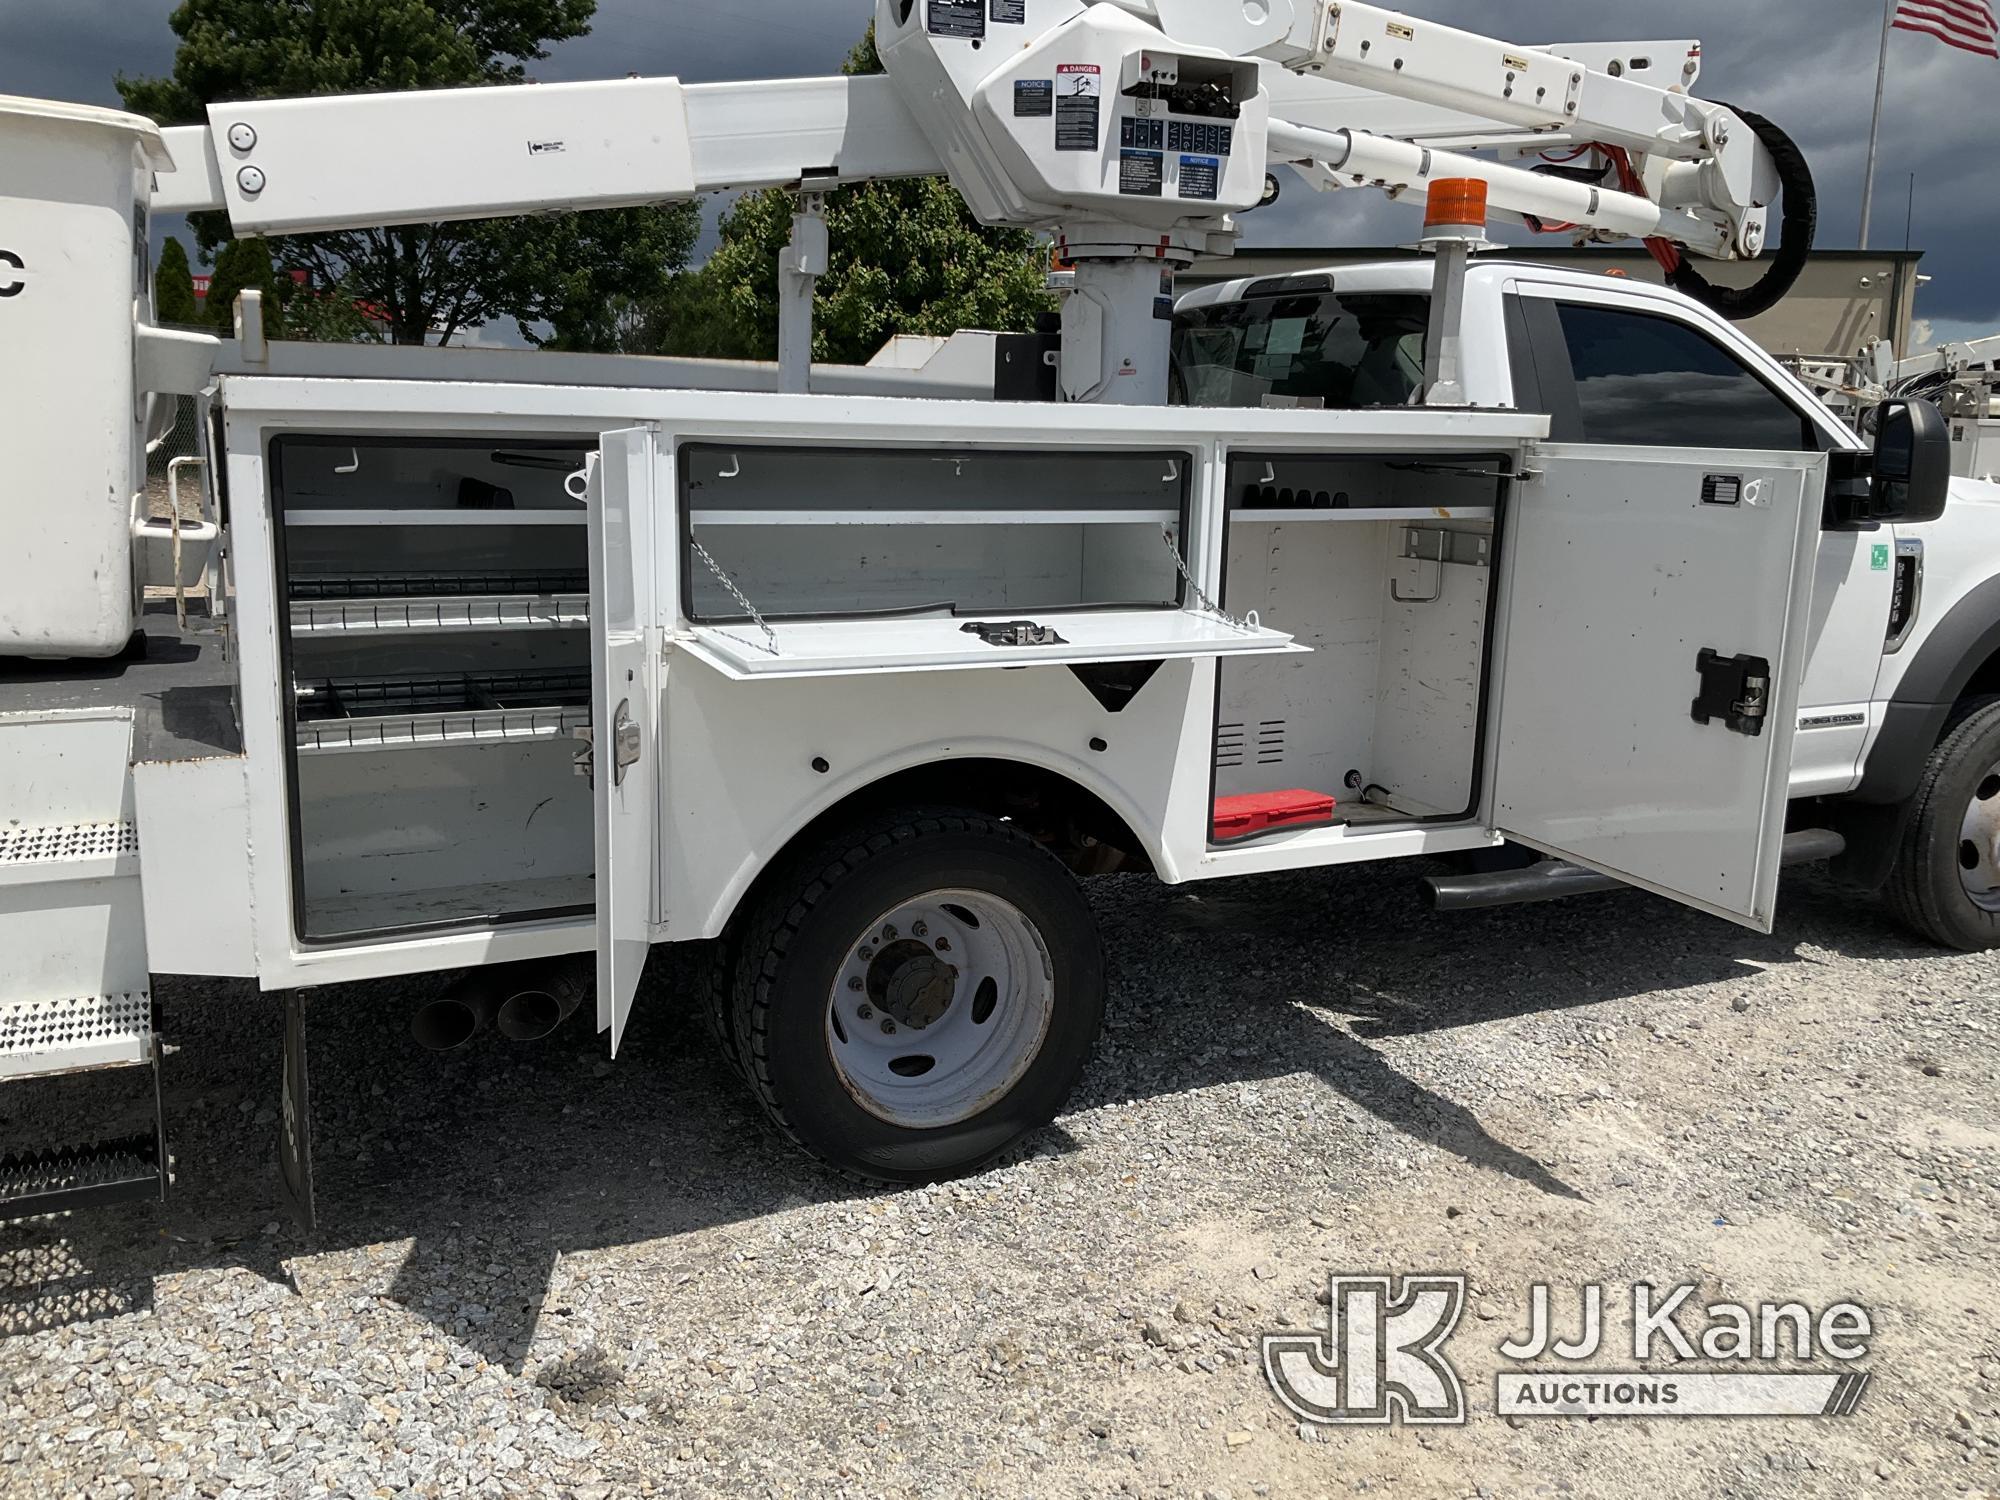 (Villa Rica, GA) Altec AT40G, Articulating & Telescopic Bucket mounted behind cab on 2017 Ford F550